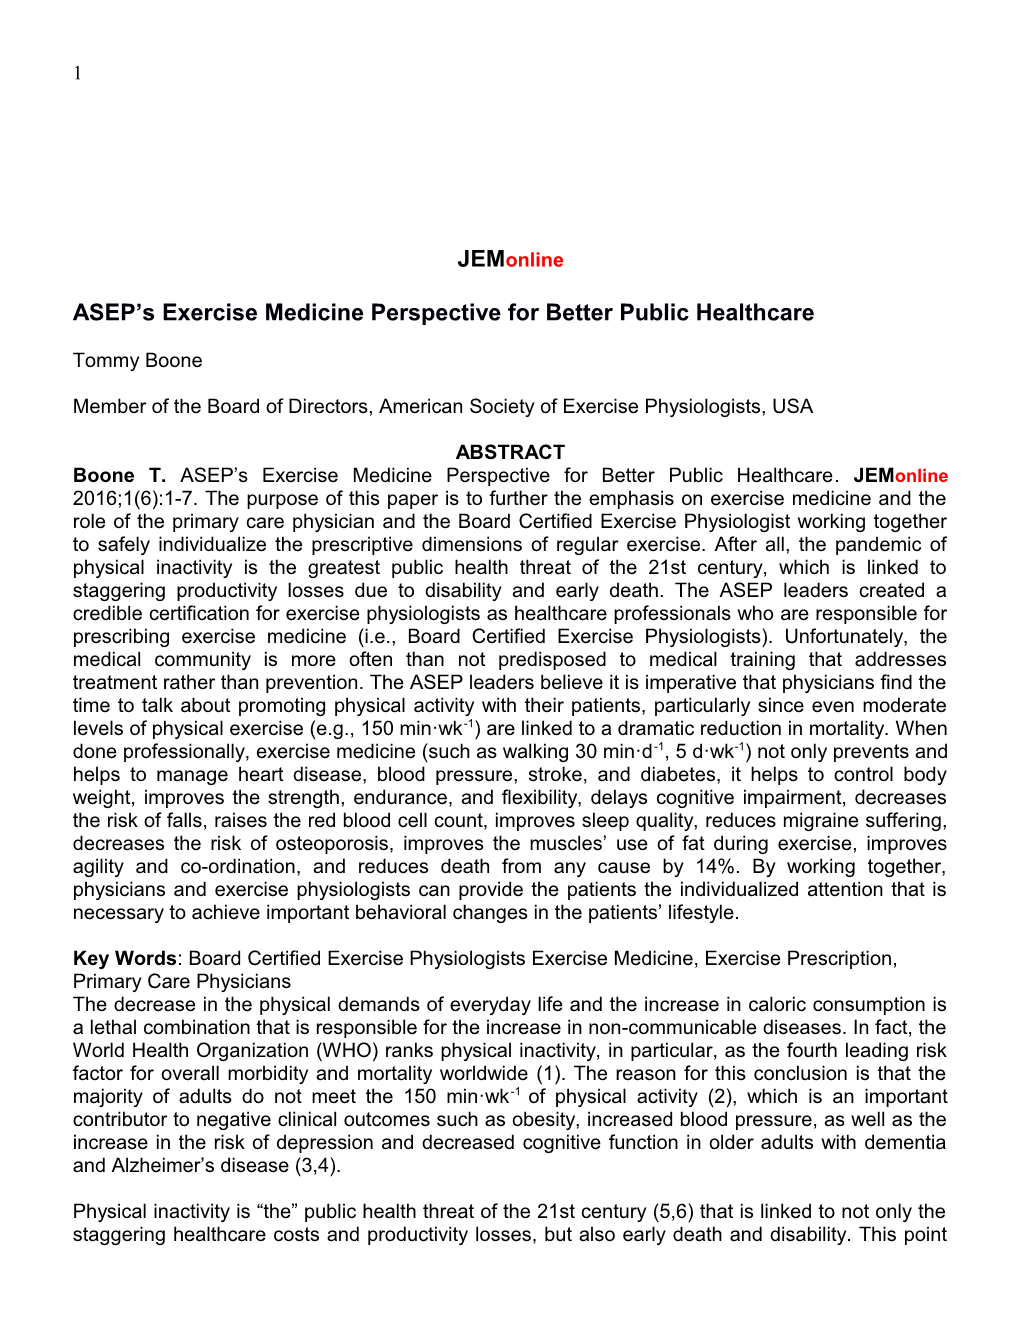 ASEP S Exercise Medicine Perspective for Better Public Healthcare